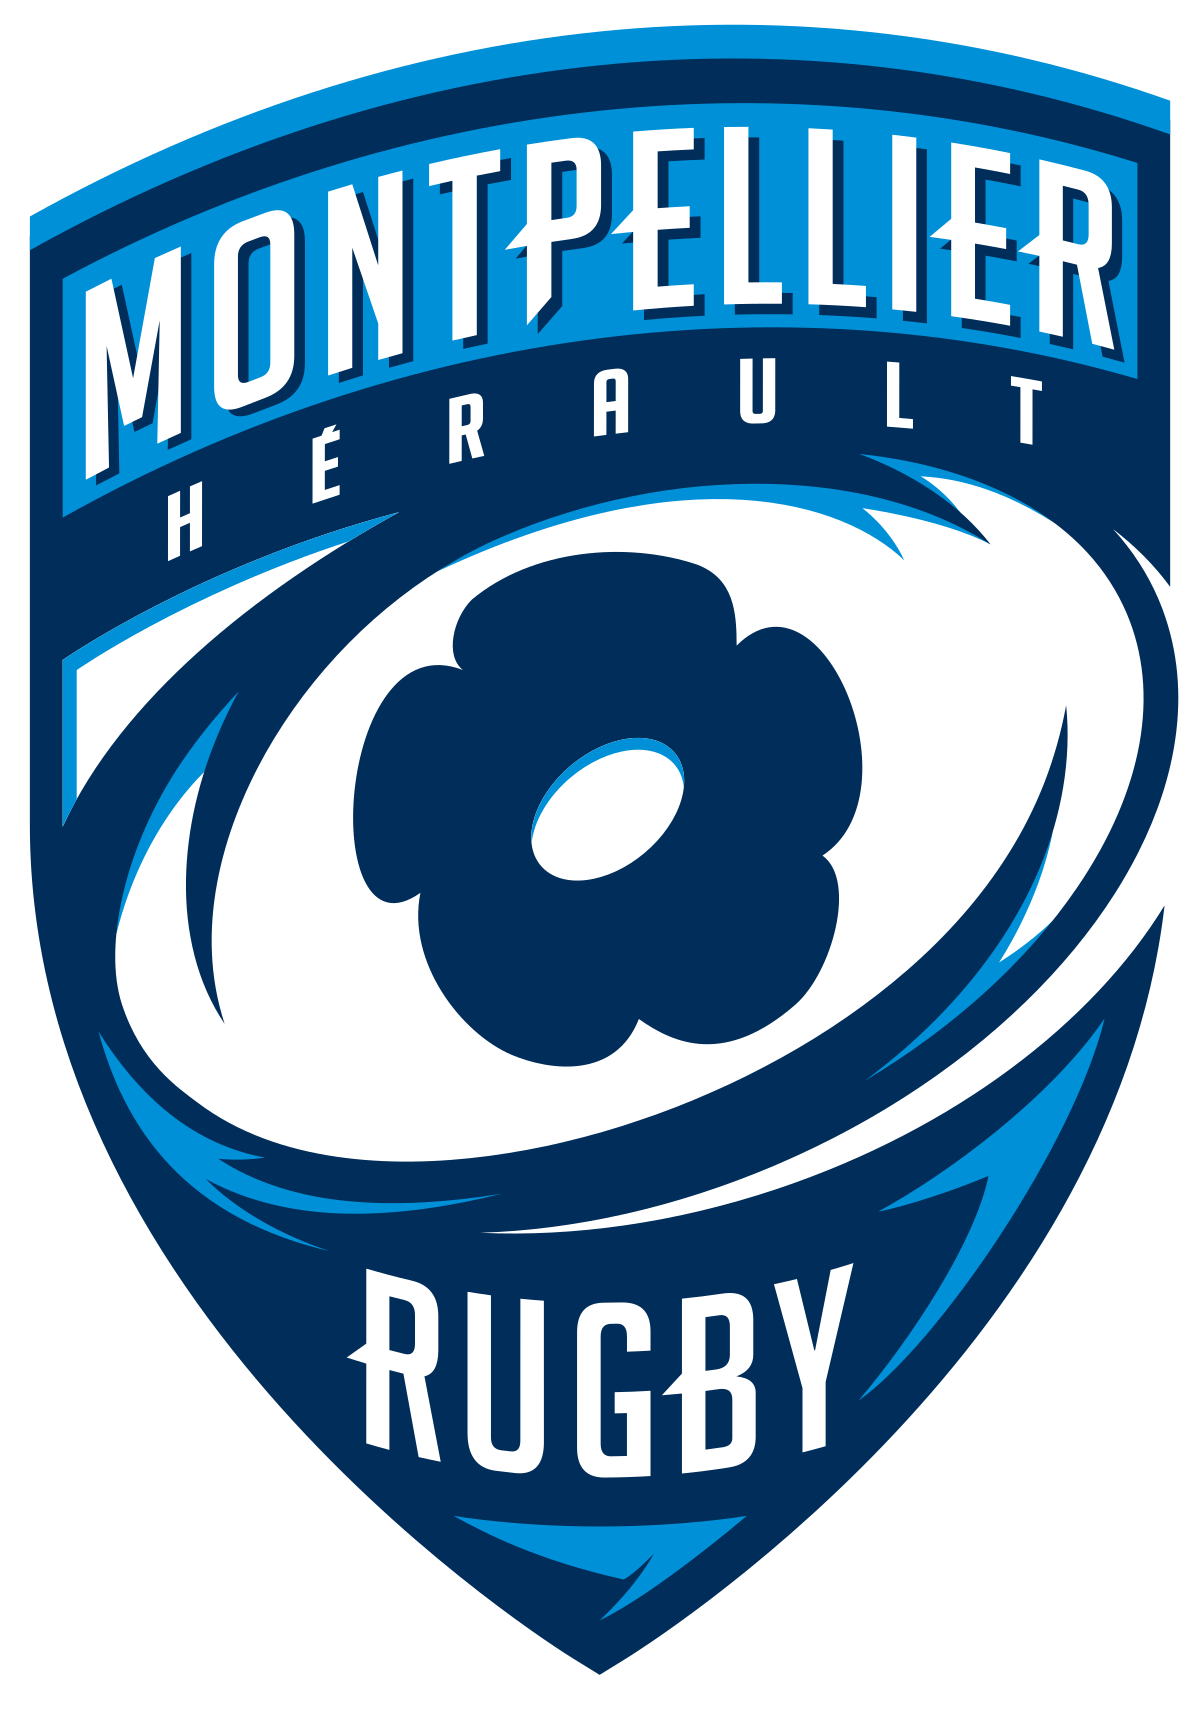 Montpellier Hérault rugby — Wikipédia